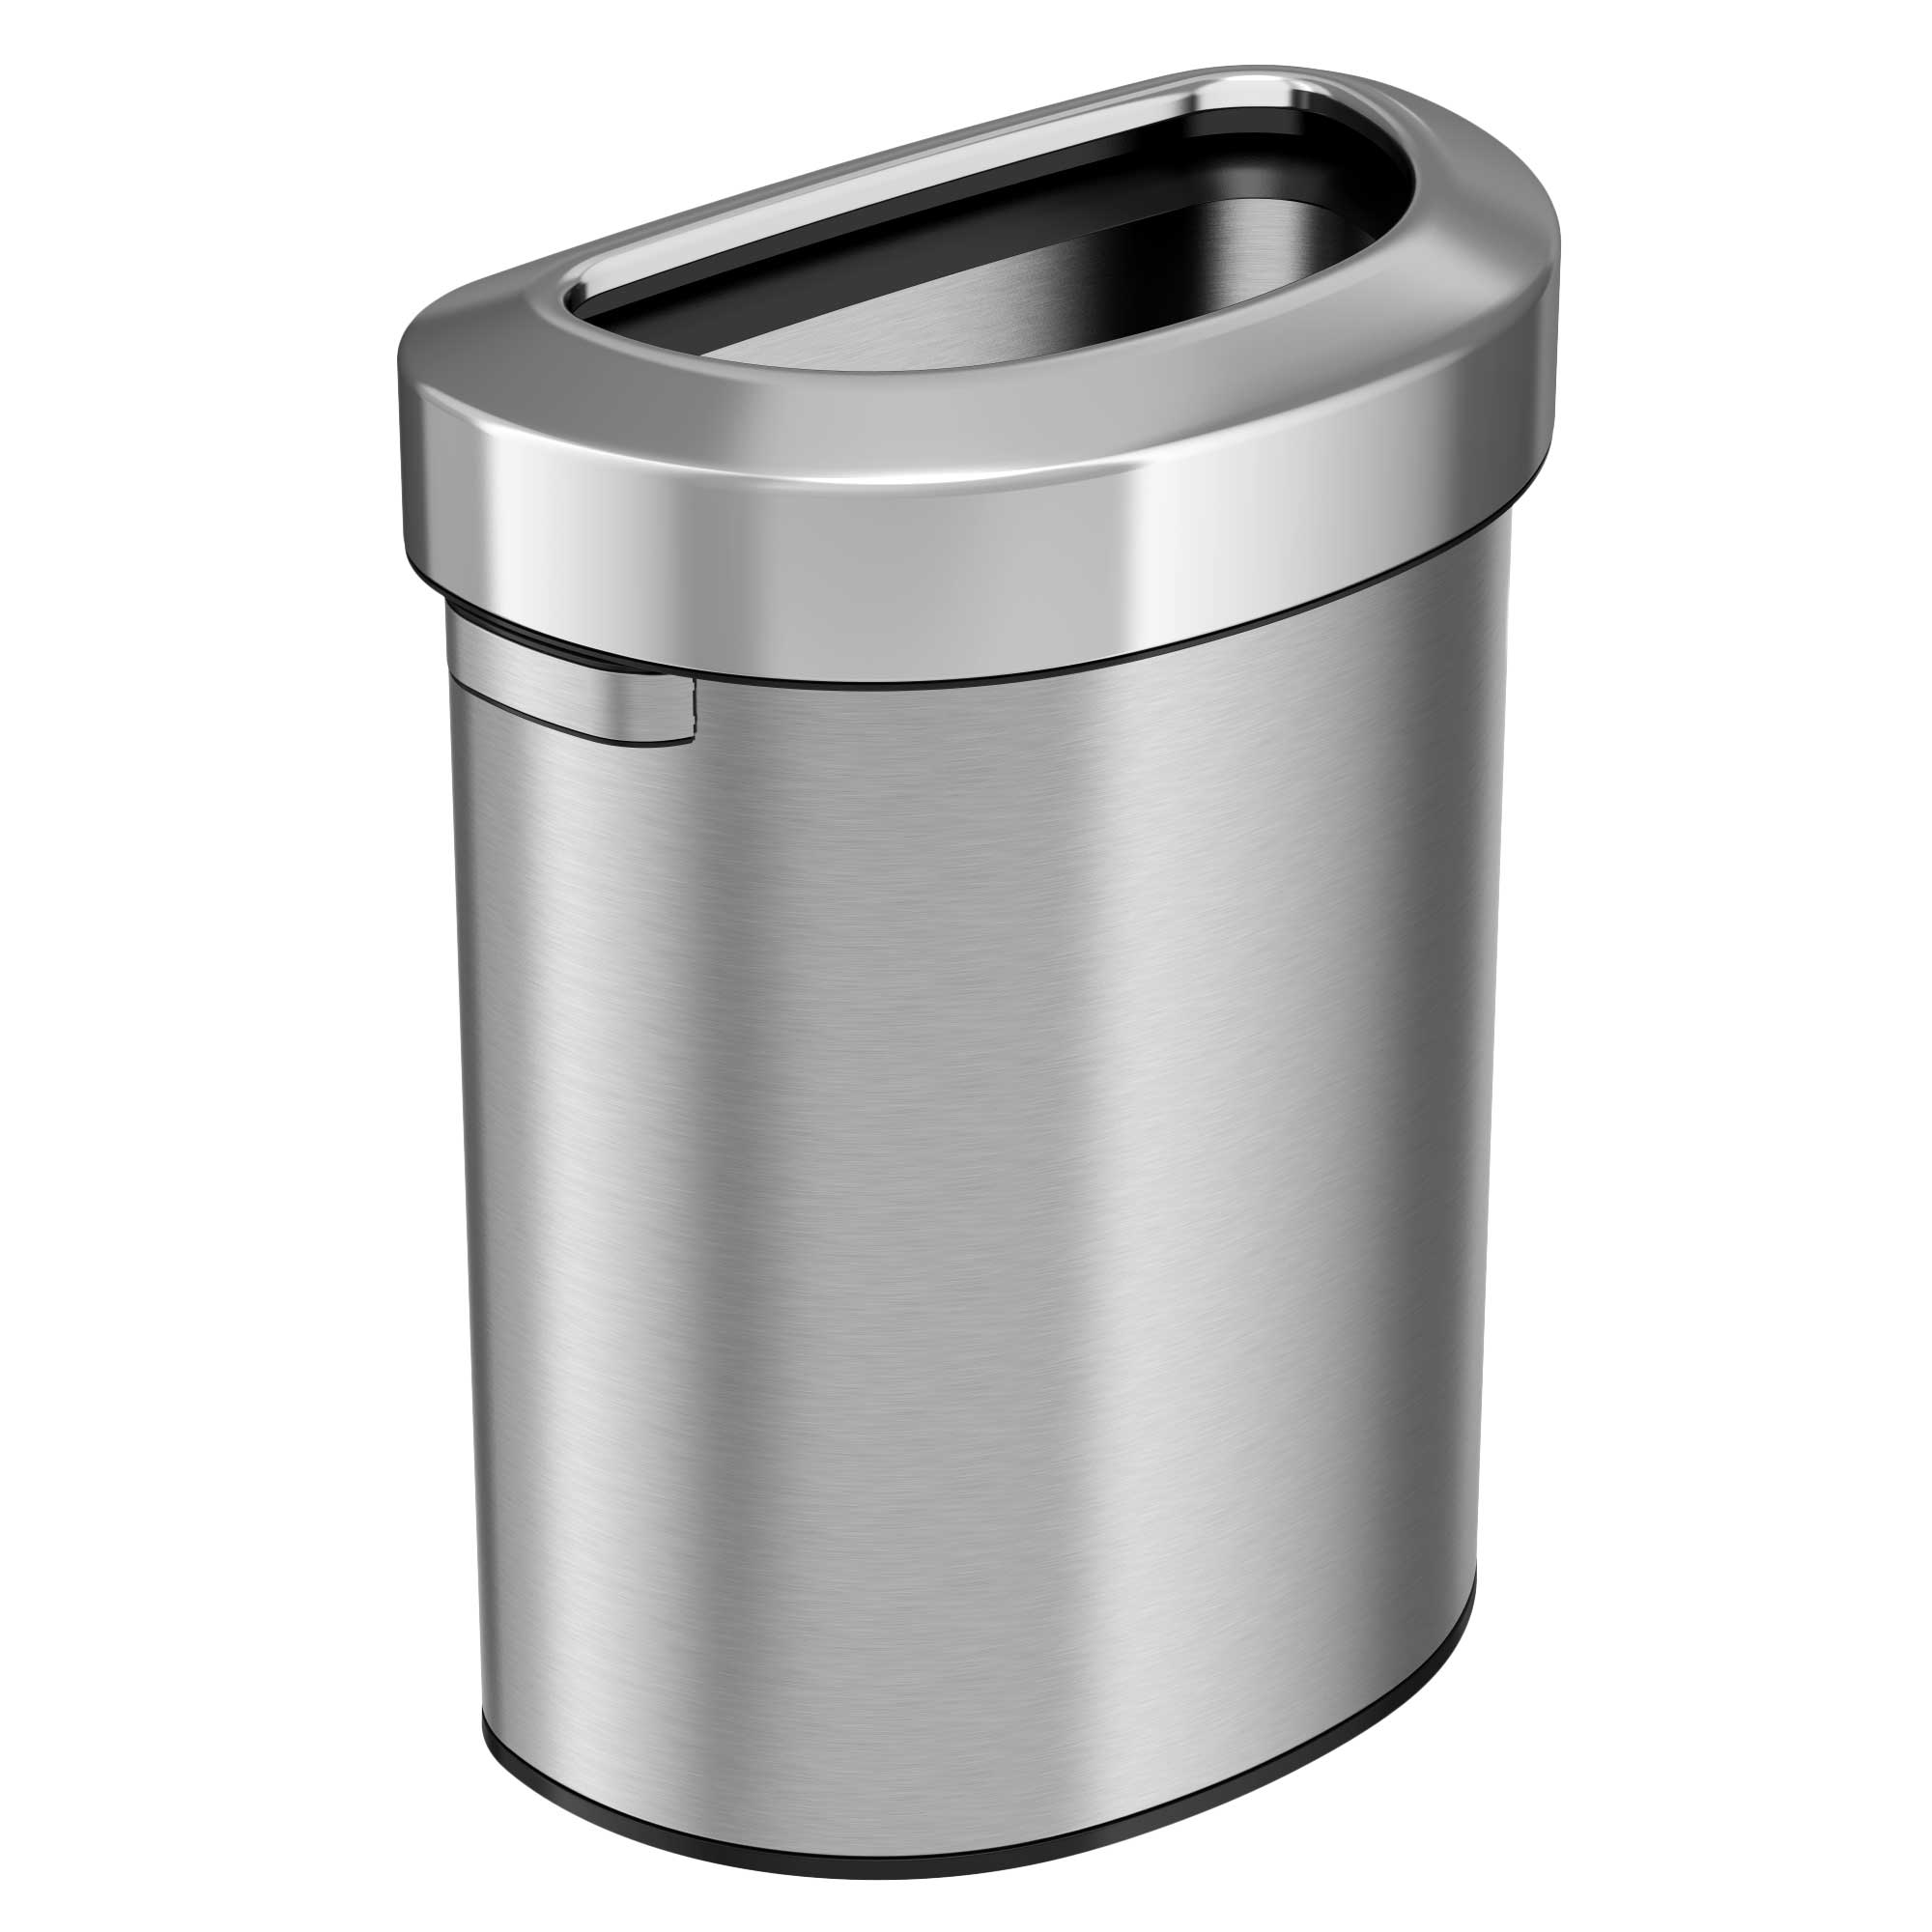  iTouchless 18 Gallon Rectangular Open Top Trash Can and Recycle  Bin with AbsorbX Odor Control System Ultra Space-Saving Large Capacity  Commercial Grade for Home, Office, Garage, Stainless Steel : Home 